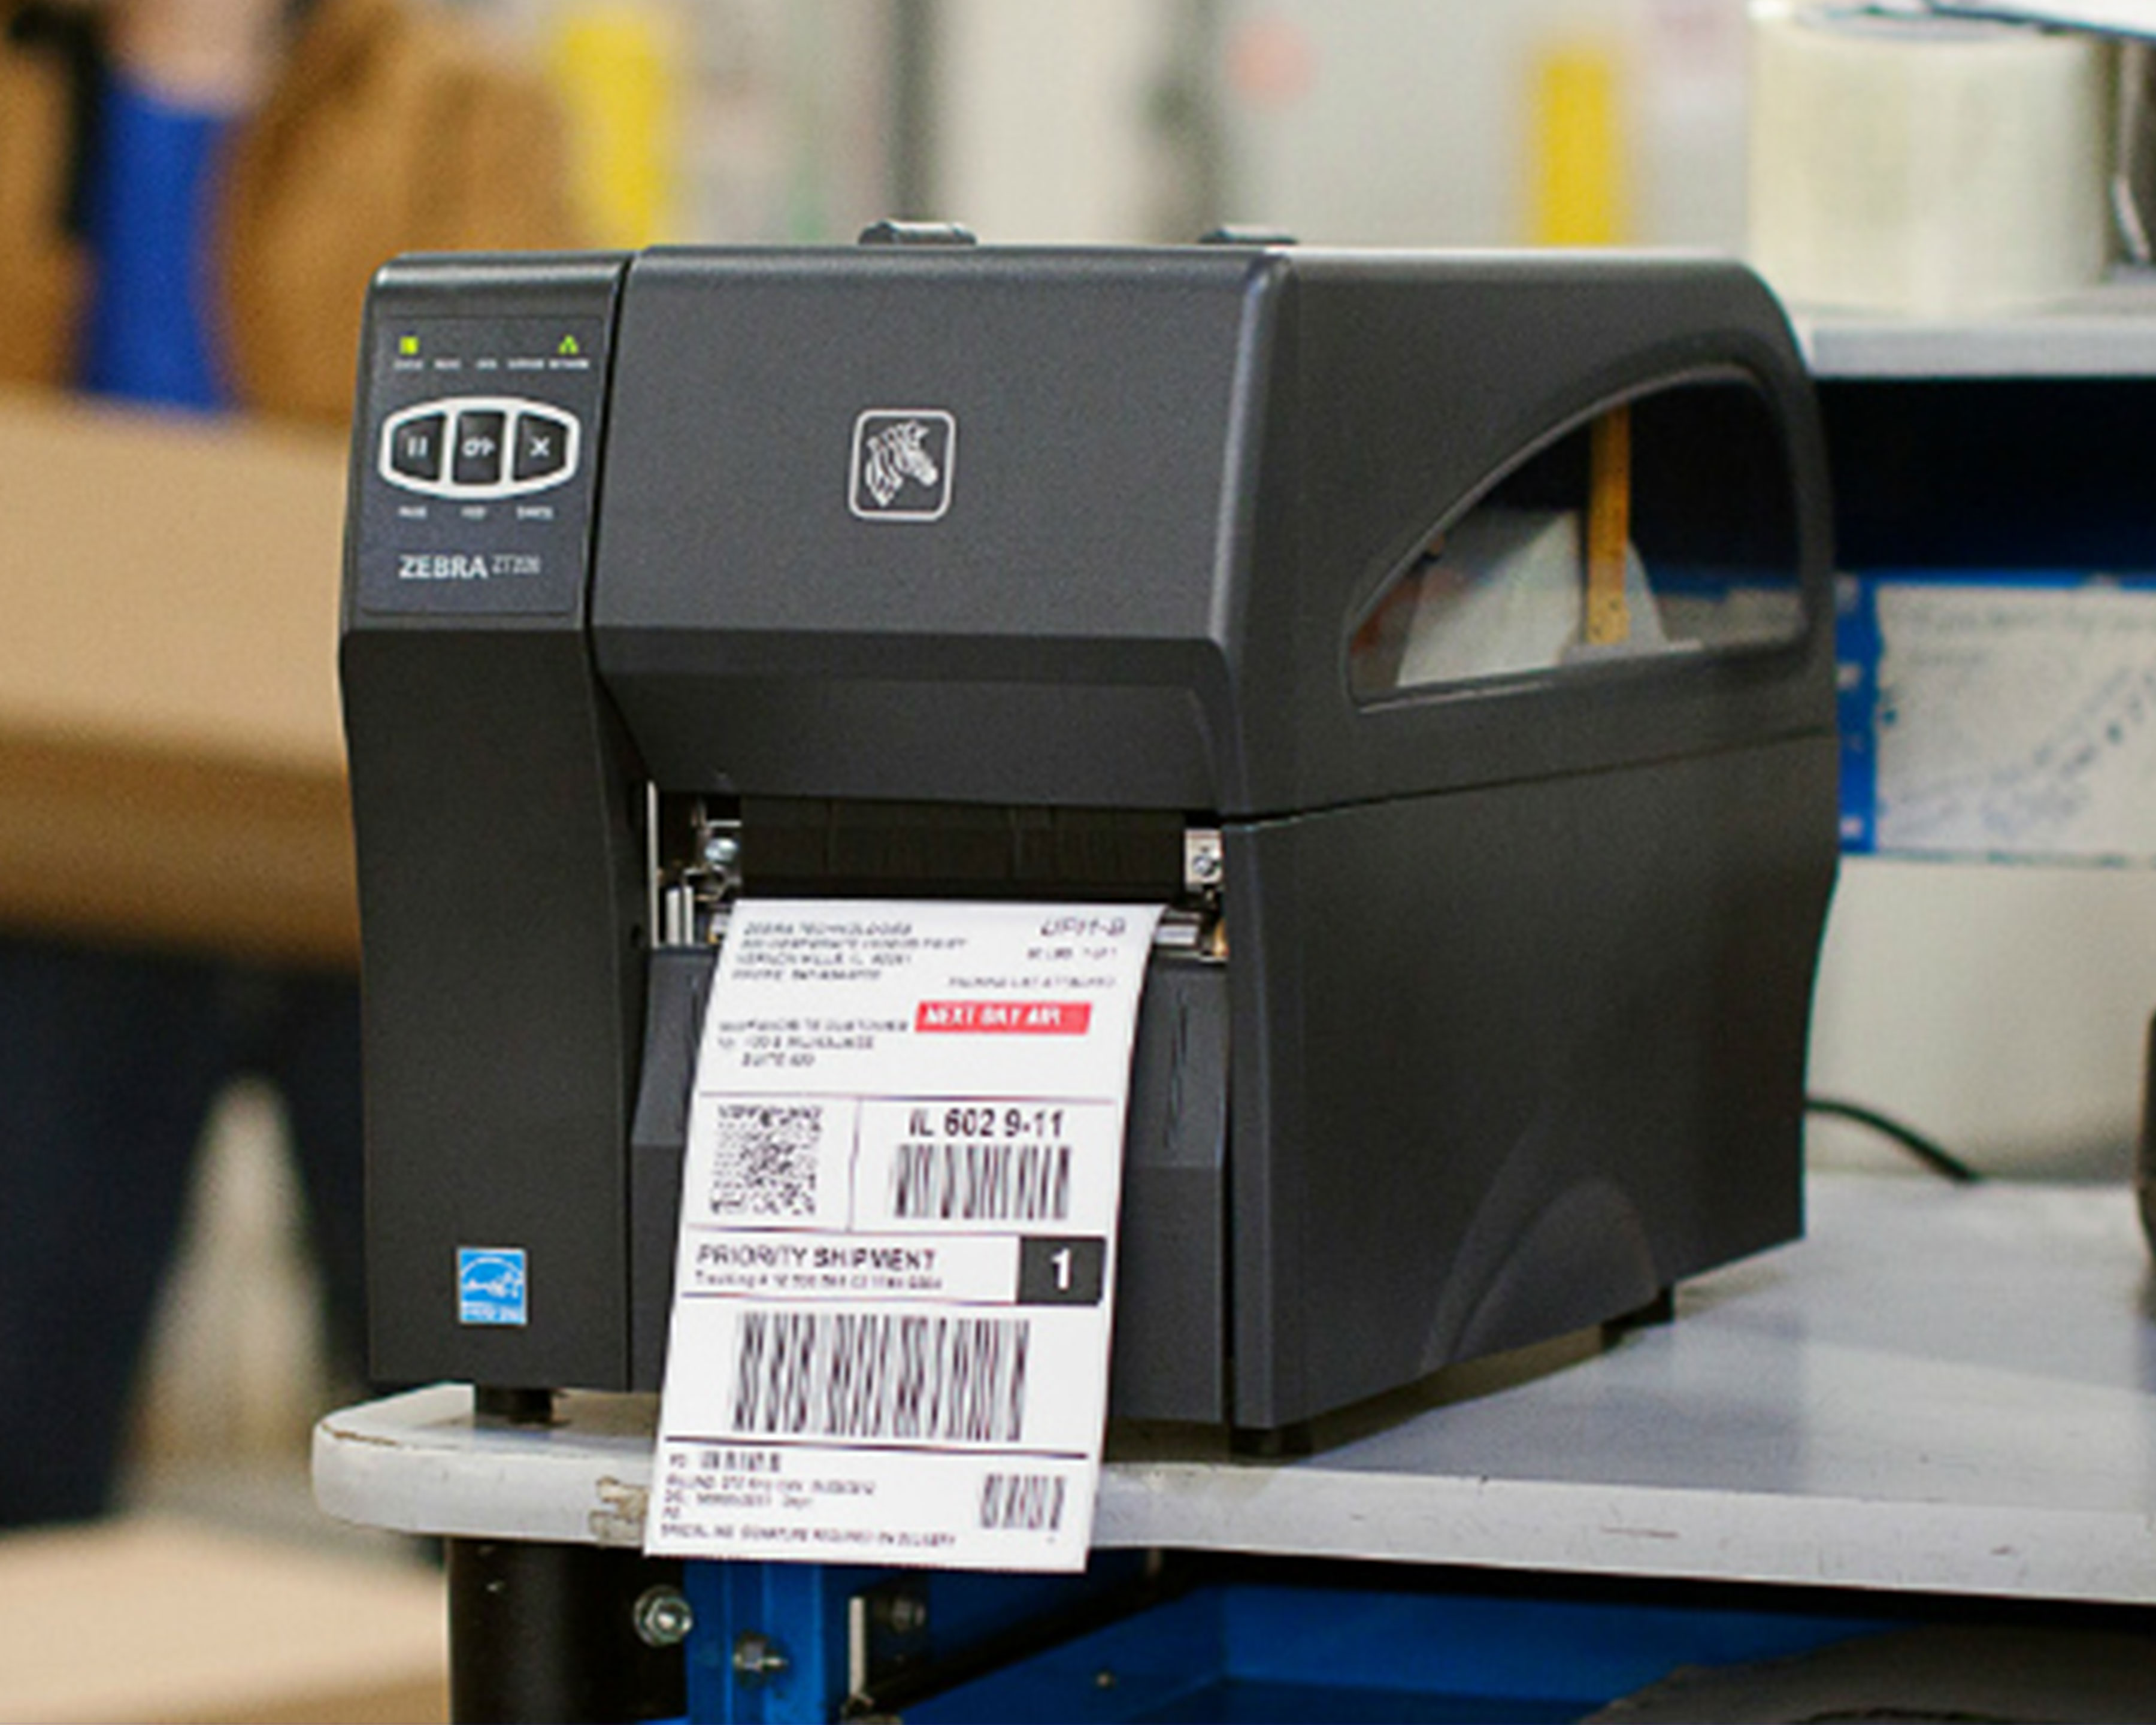 Zebra ZT200 industrial printer with IQ Color direct-thermal ink technology prints out a colored retail shipping label